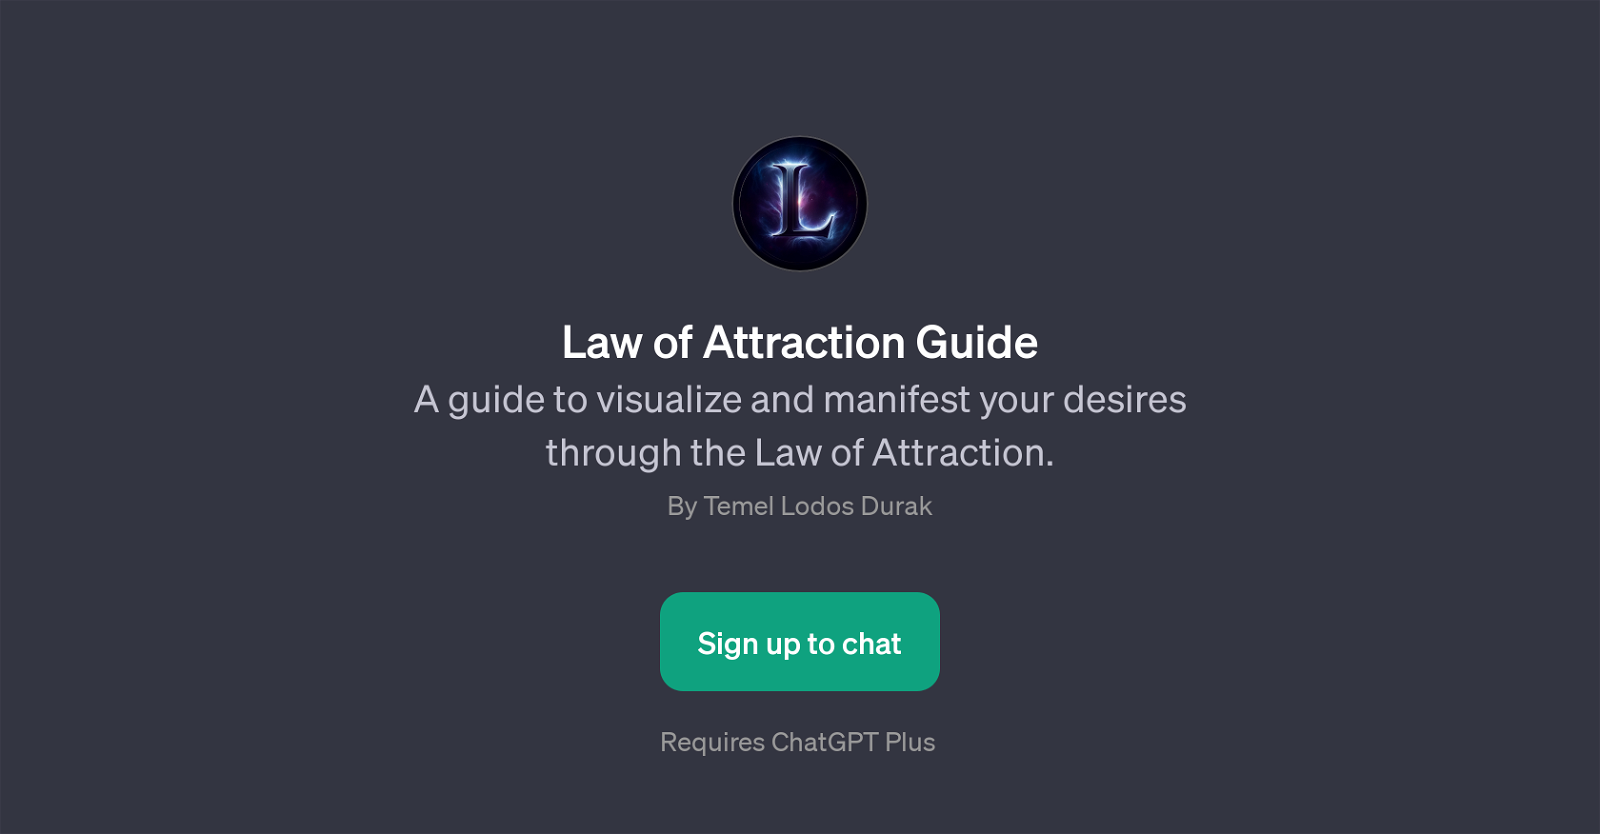 Law of Attraction Guide website